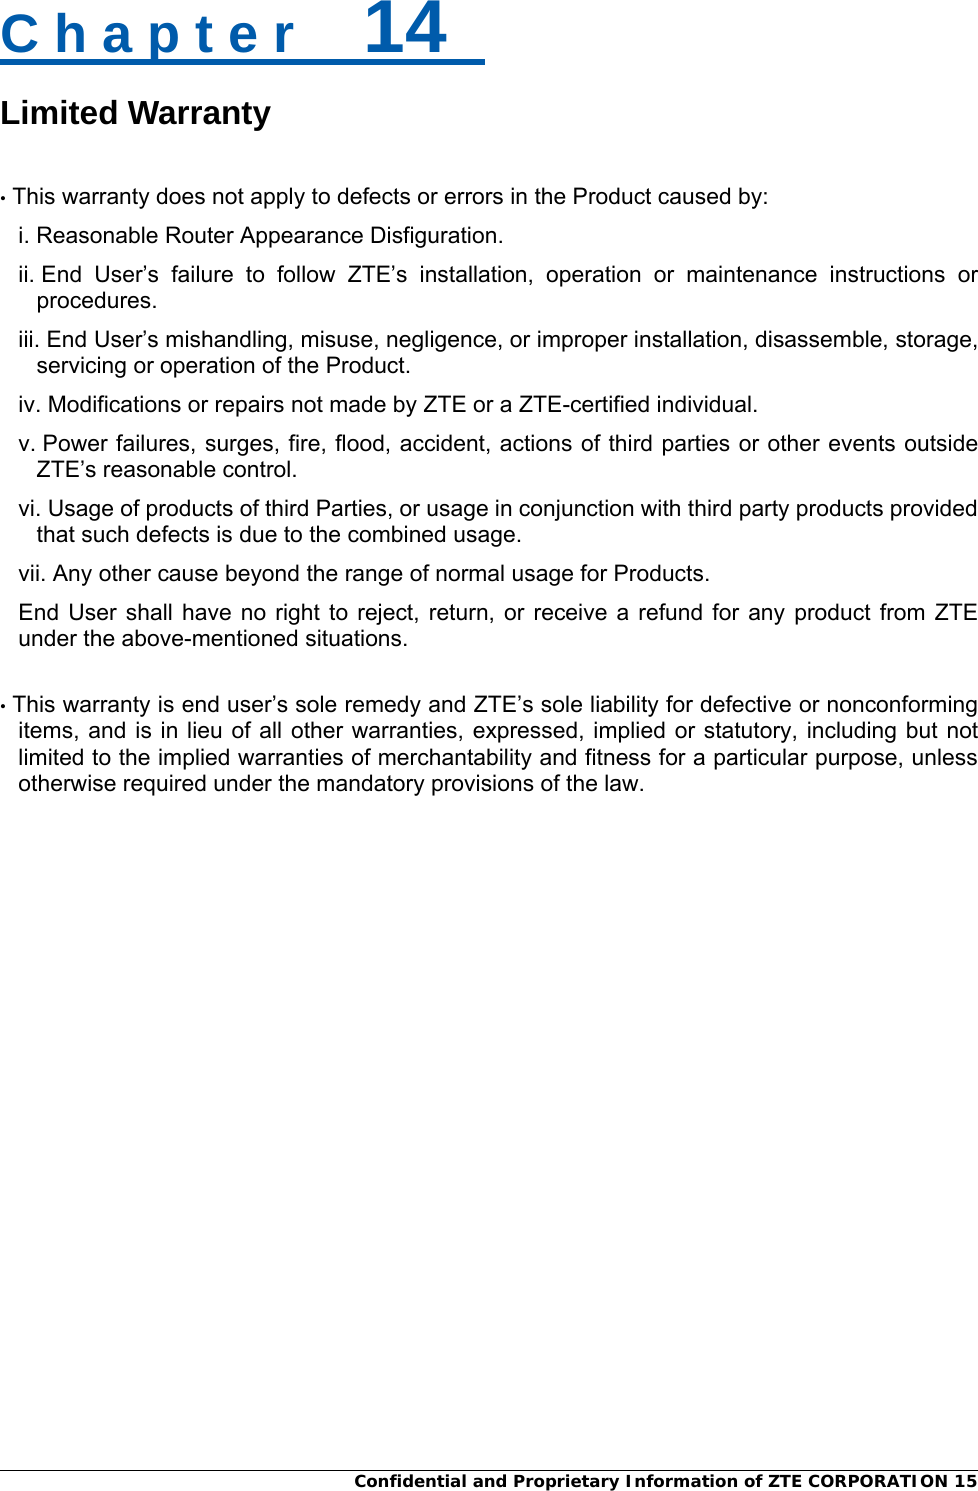  Confidential and Proprietary Information of ZTE CORPORATION 15C h a p t e r    14   Limited Warranty  • This warranty does not apply to defects or errors in the Product caused by: i. Reasonable Router Appearance Disfiguration. ii. End User’s failure to follow ZTE’s installation, operation or maintenance instructions or procedures. iii. End User’s mishandling, misuse, negligence, or improper installation, disassemble, storage, servicing or operation of the Product. iv. Modifications or repairs not made by ZTE or a ZTE-certified individual. v. Power failures, surges, fire, flood, accident, actions of third parties or other events outside ZTE’s reasonable control. vi. Usage of products of third Parties, or usage in conjunction with third party products provided that such defects is due to the combined usage. vii. Any other cause beyond the range of normal usage for Products.   End User shall have no right to reject, return, or receive a refund for any product from ZTE under the above-mentioned situations.    • This warranty is end user’s sole remedy and ZTE’s sole liability for defective or nonconforming items, and is in lieu of all other warranties, expressed, implied or statutory, including but not limited to the implied warranties of merchantability and fitness for a particular purpose, unless otherwise required under the mandatory provisions of the law. 